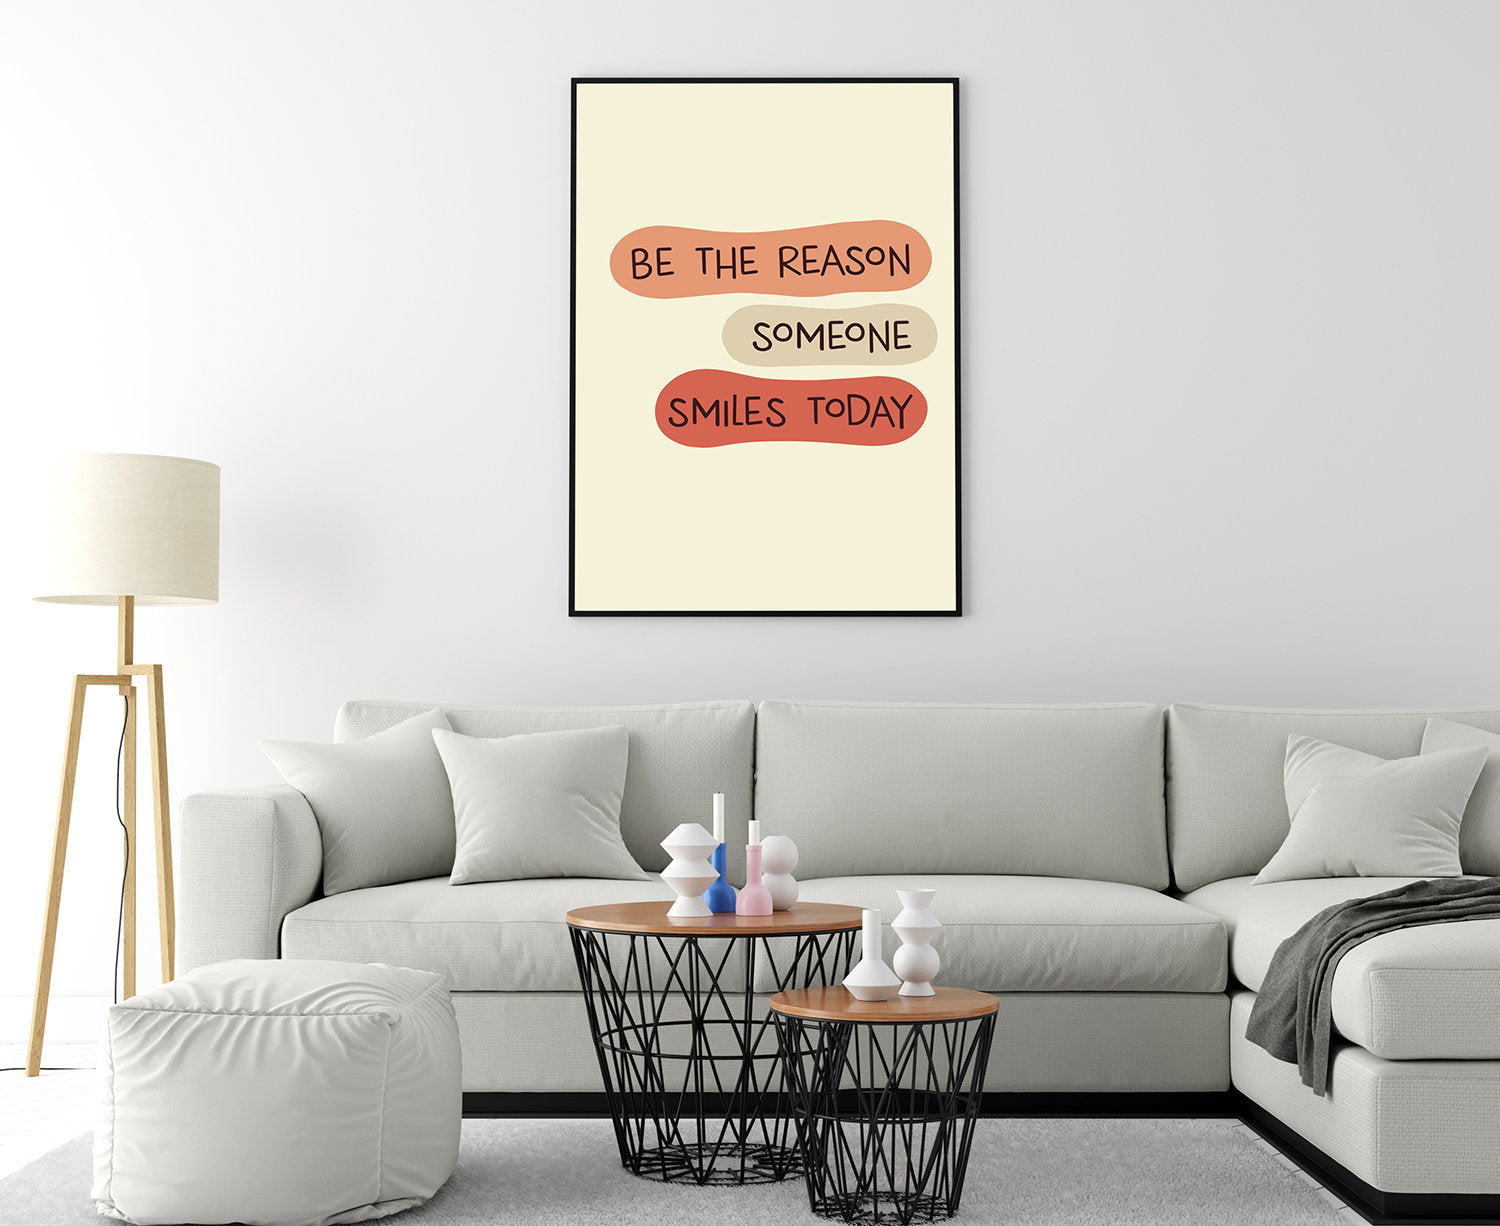 Be the reason someone smiles today, Quotes Poster Print